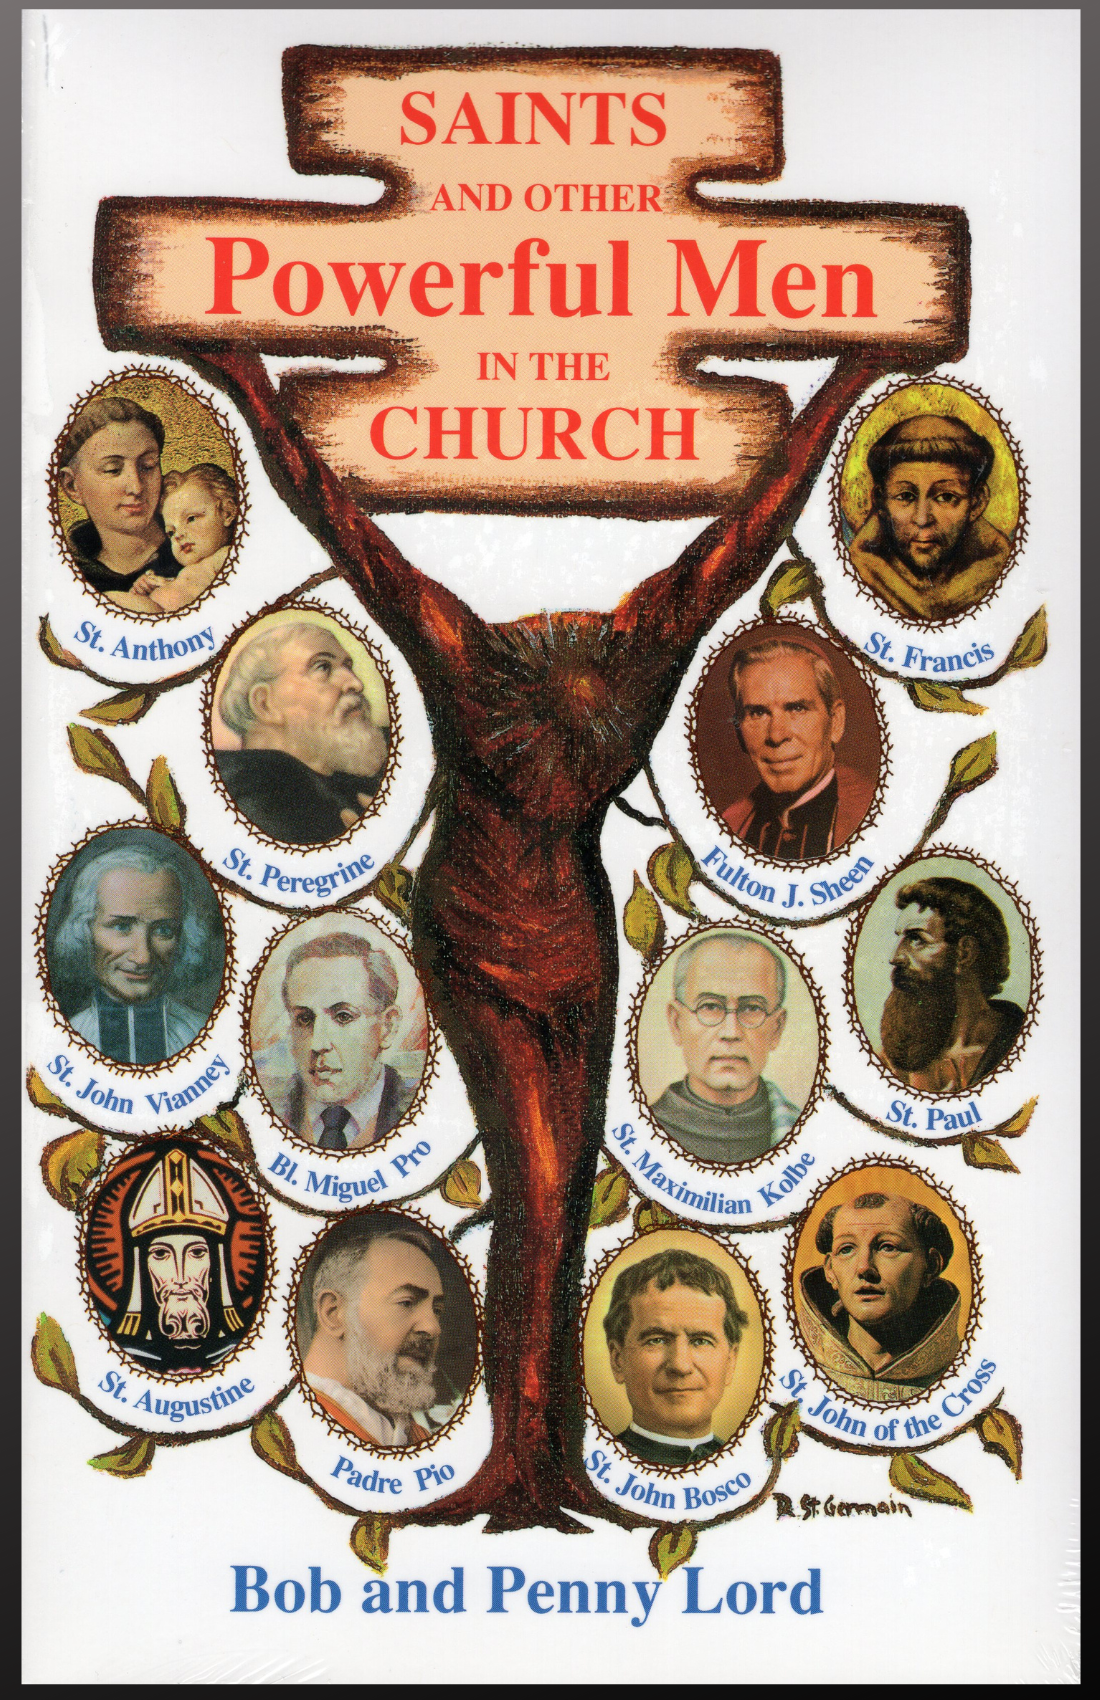 Saints and Other Powerful Men in the Church Book - Bob and Penny Lord